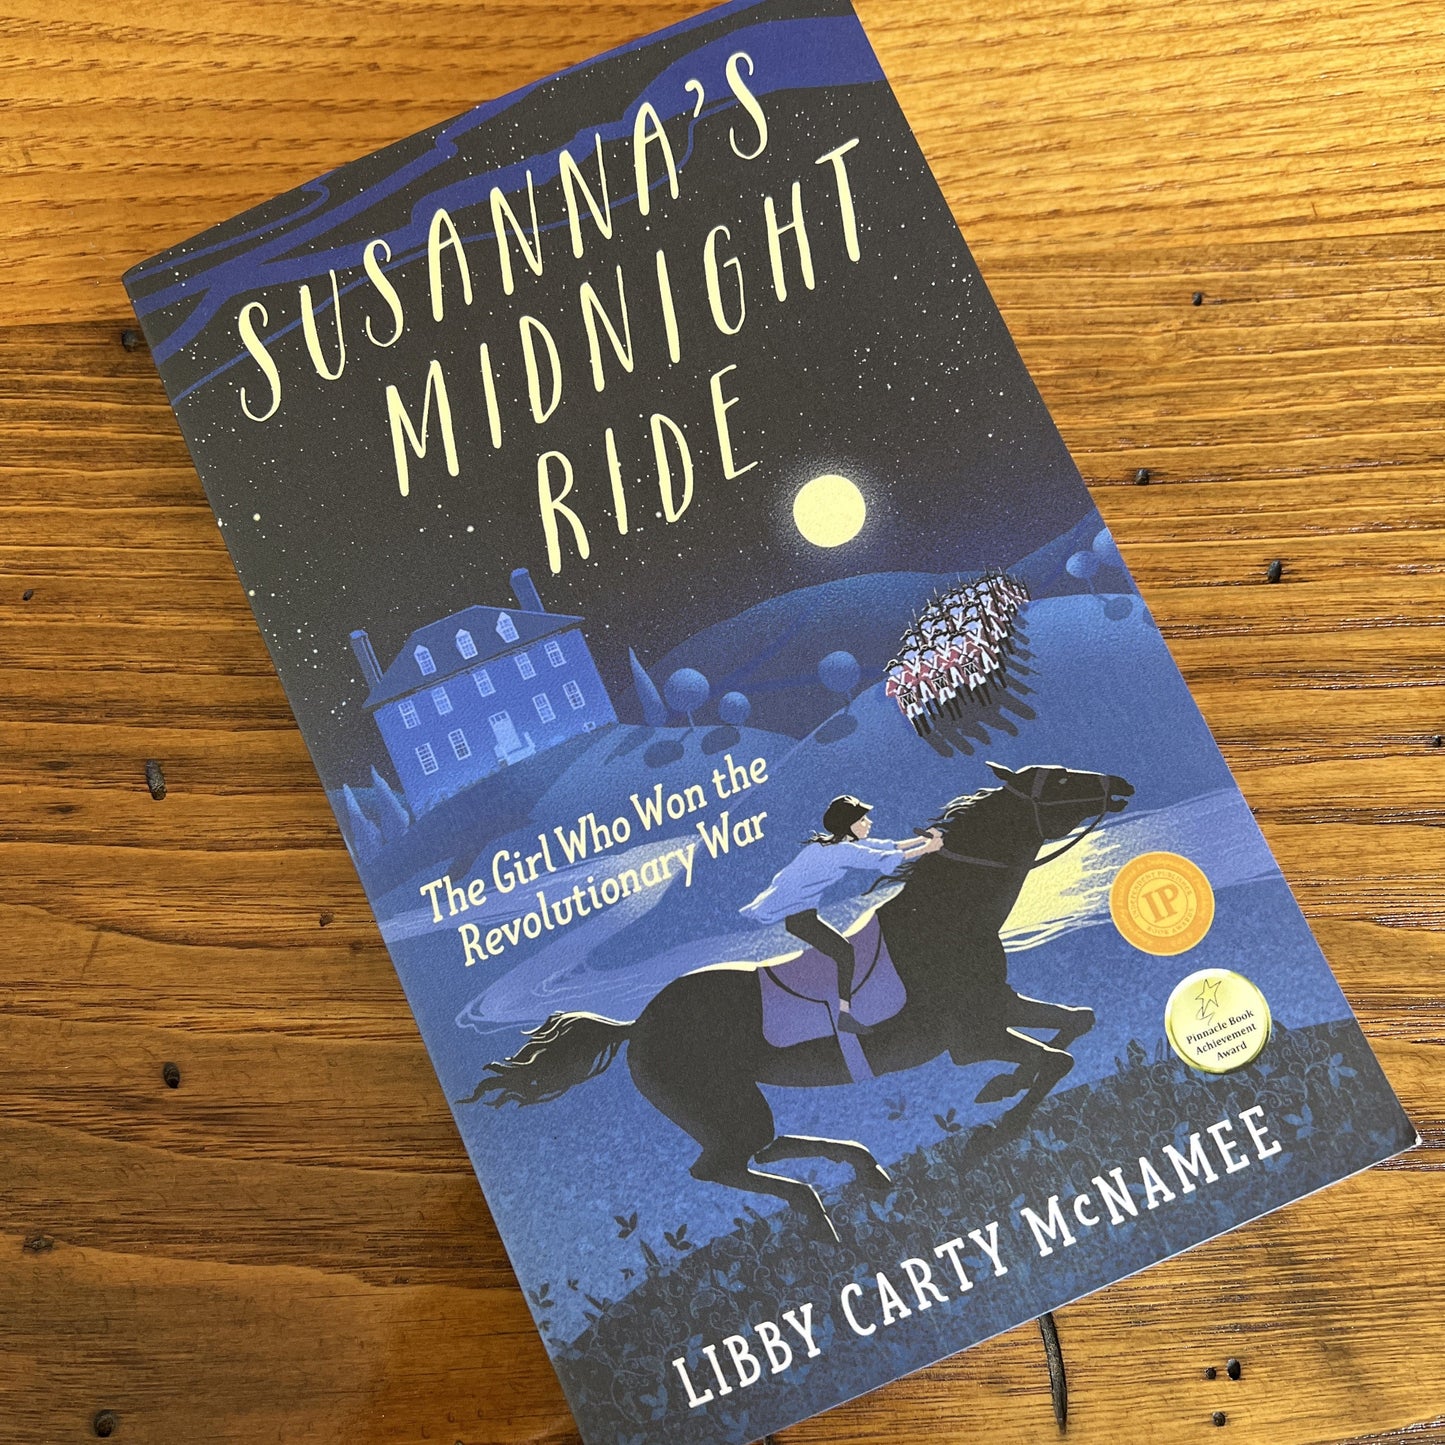 "Susanna's Midnight Ride: The Girl Who Won the Revolutionary War" - Signed by the author, Libby Carty McNamee from the History List Store